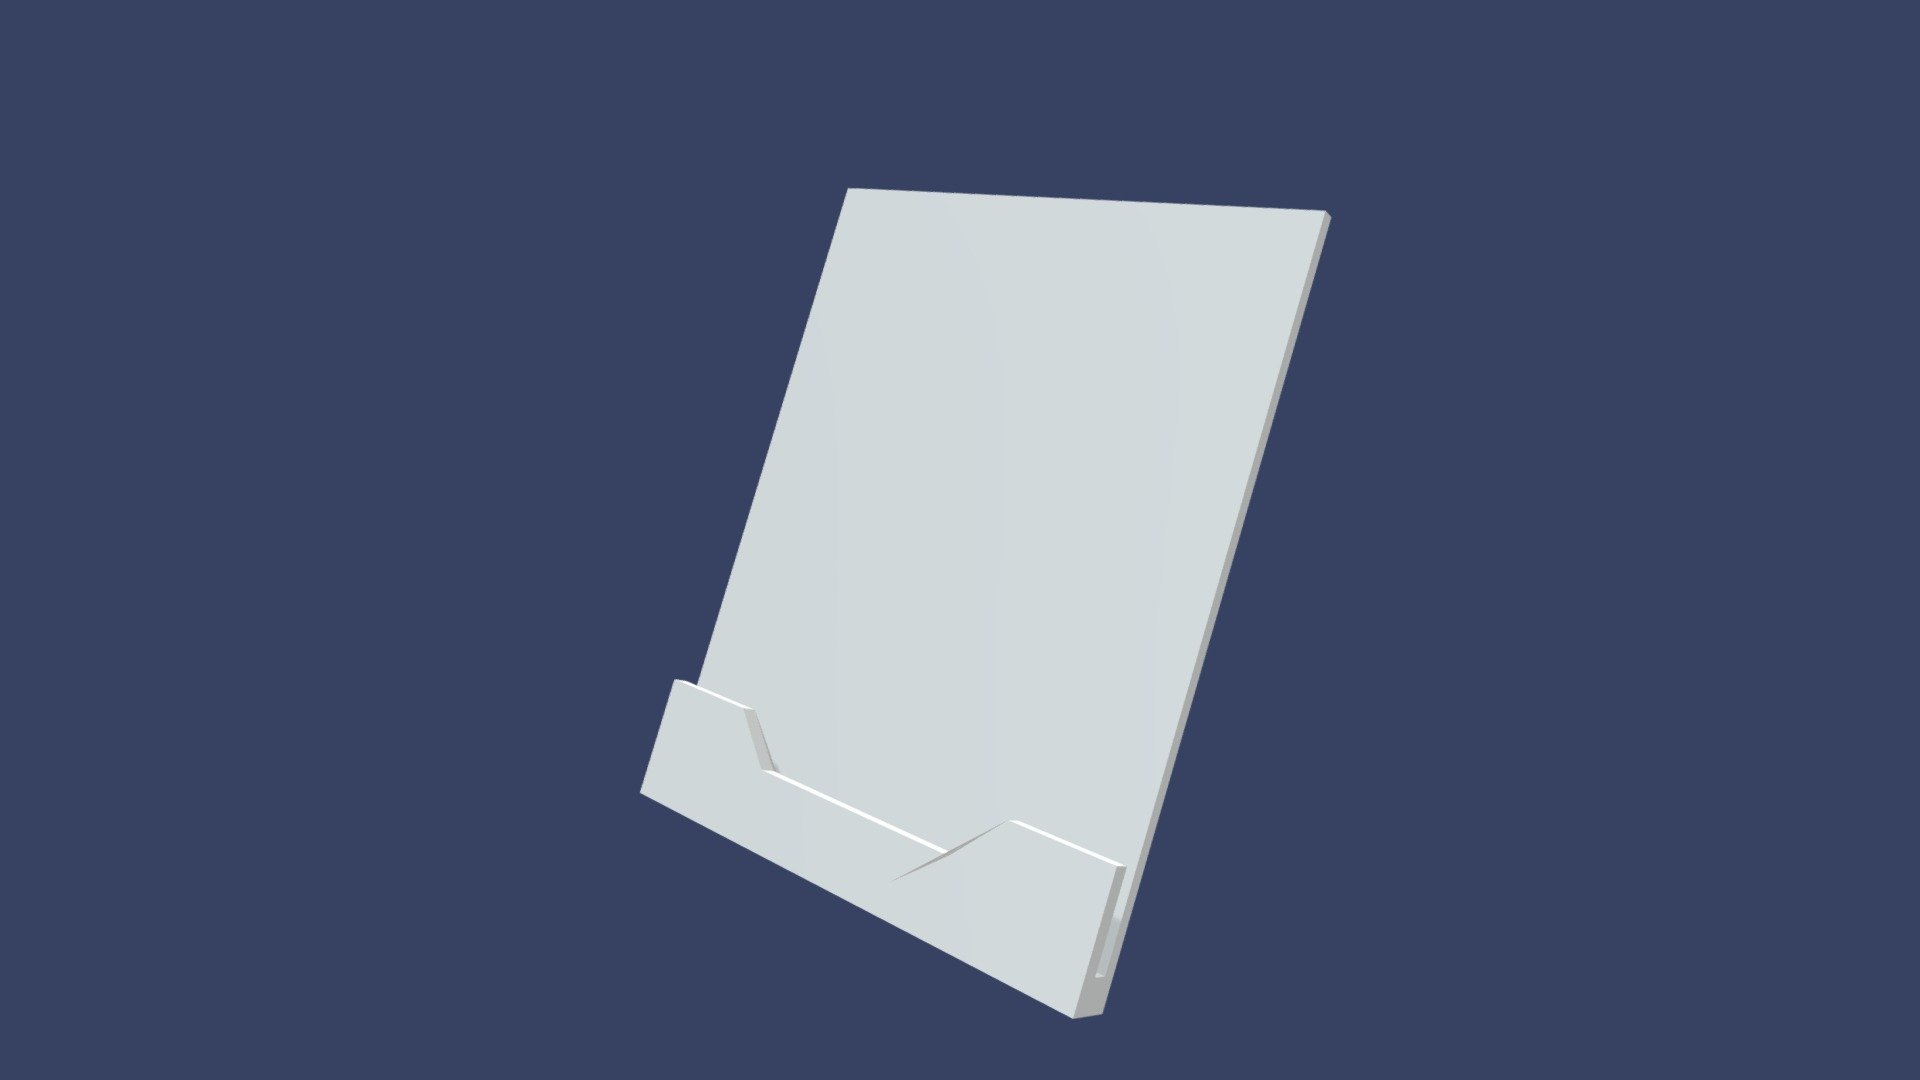 Model is meant to be one of those holders that appear on front desks or other business's that hold/advertise information or form e.g. a map or brochure at the front desk of a hotel. Modeled in blender 3d model